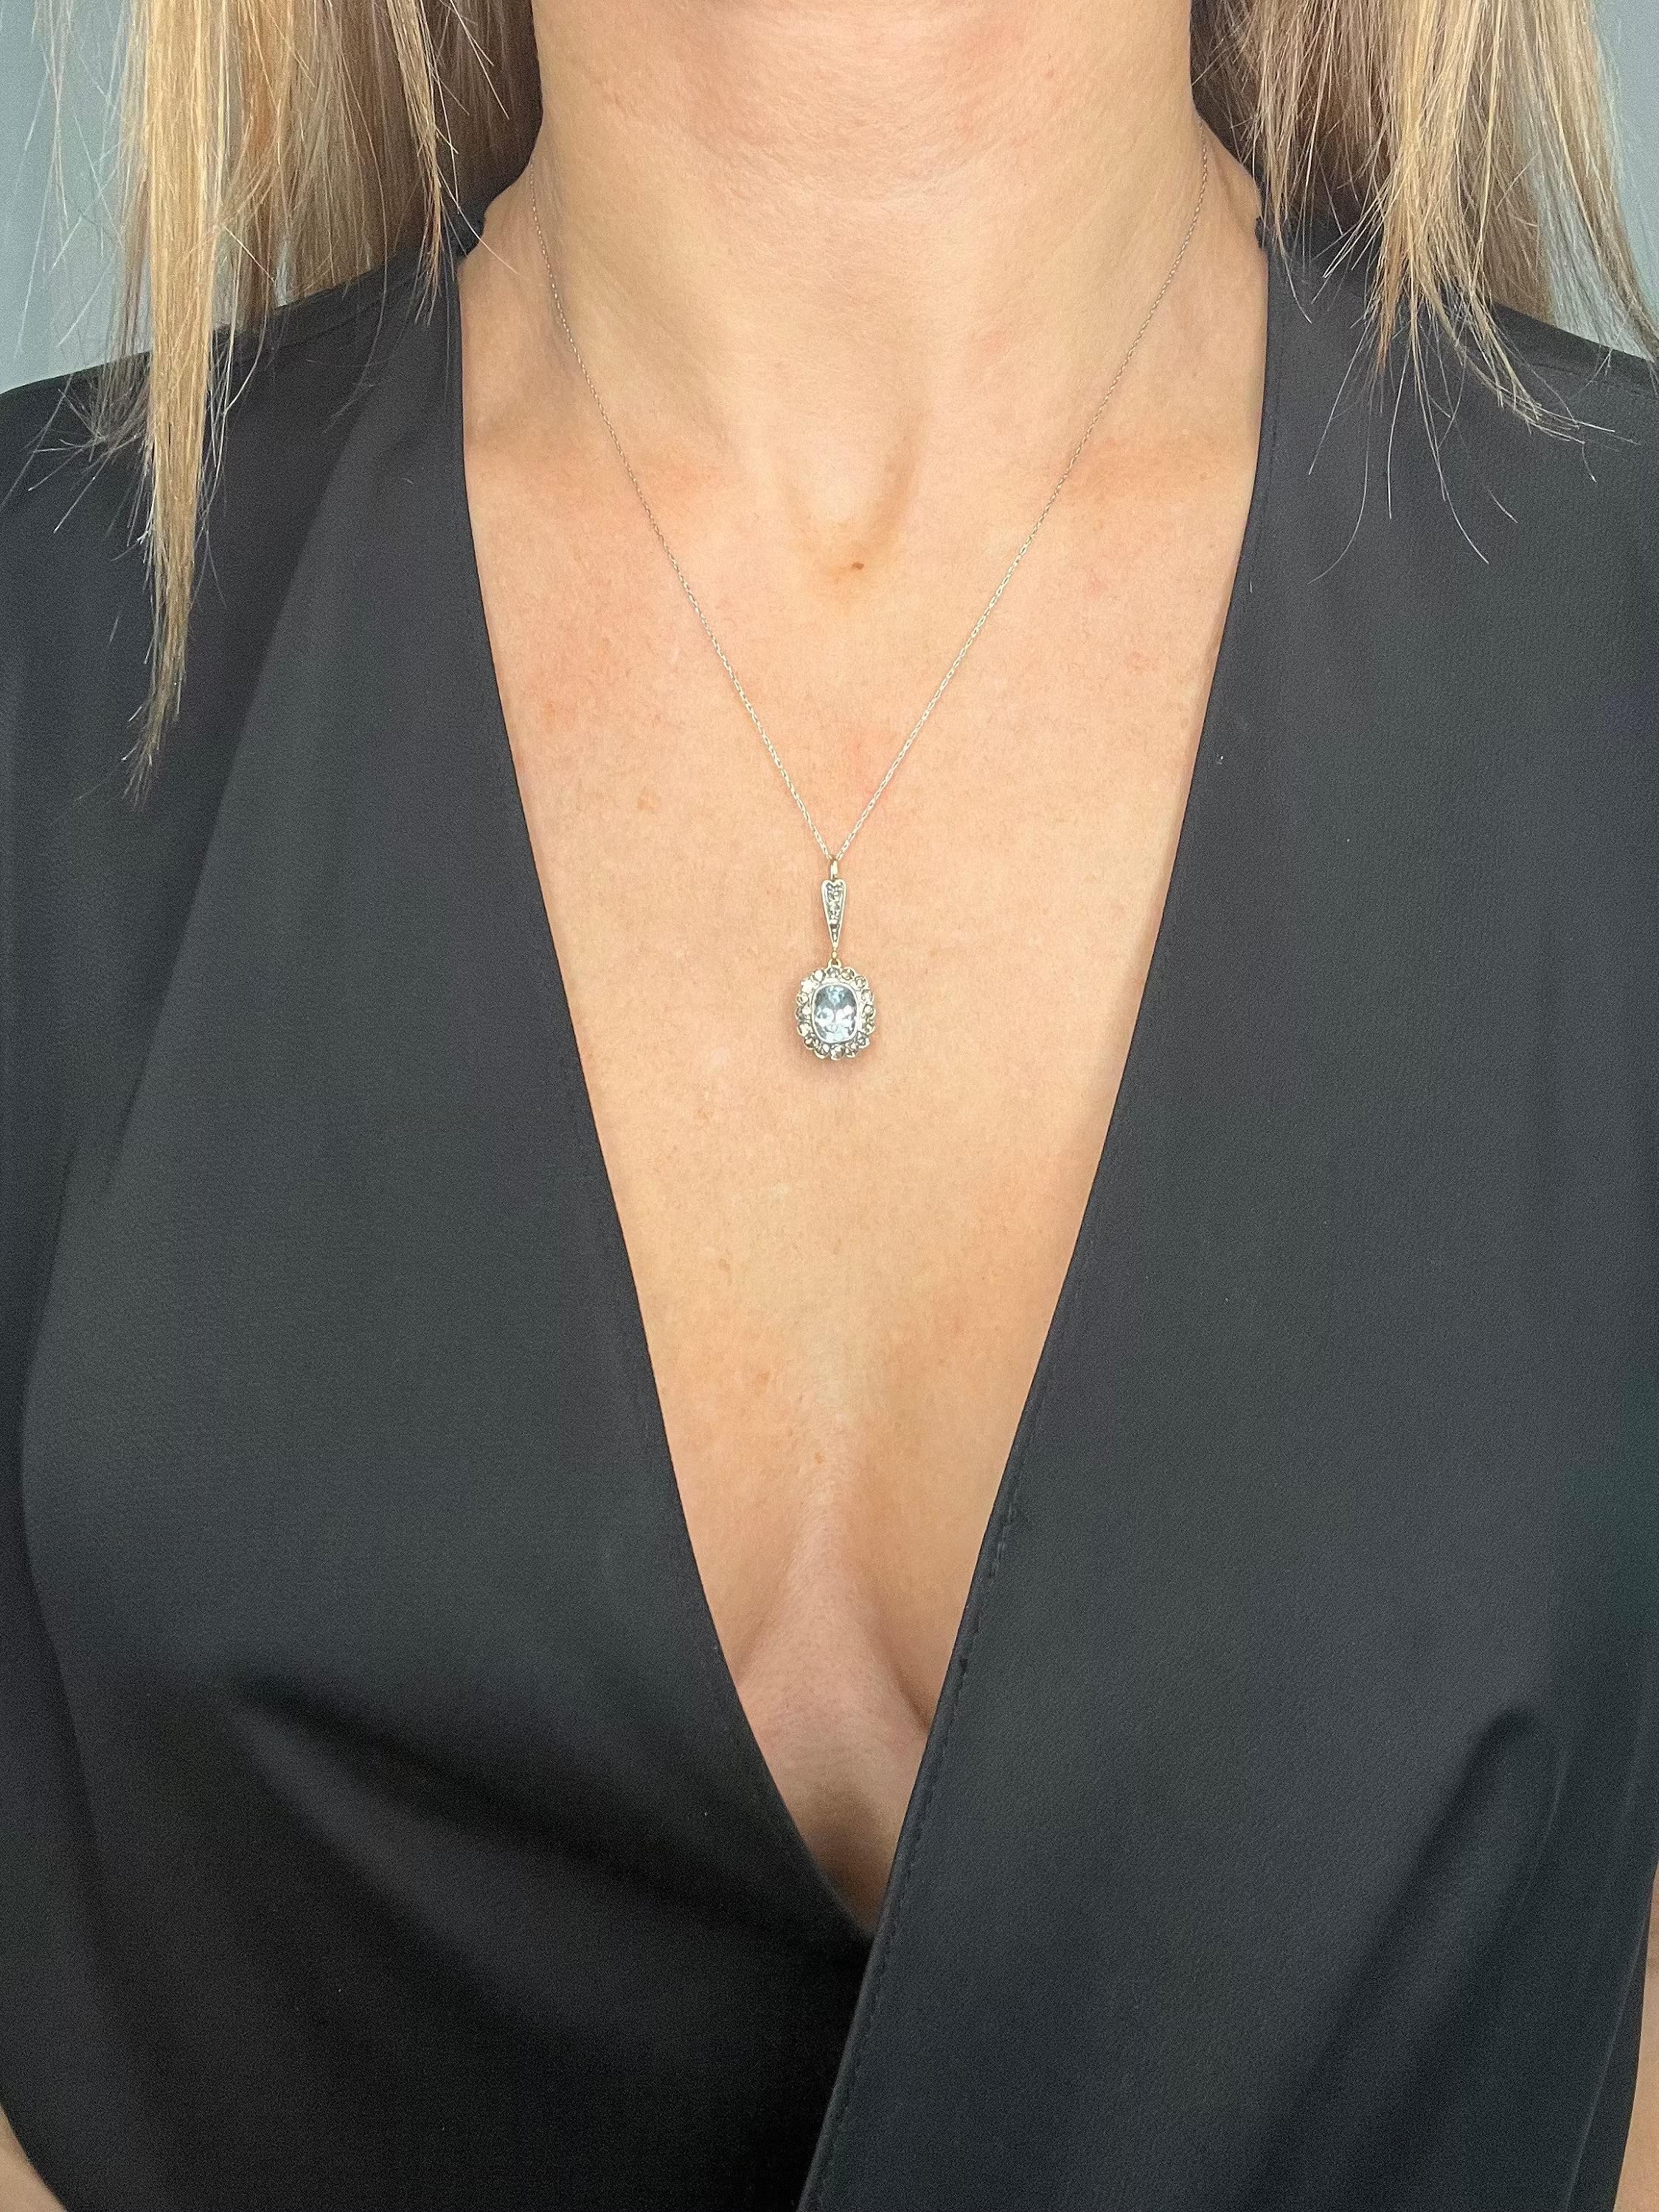 Antique Aquamarine Pendant 

18ct Gold Tested

Circa 1930s

This exquisite pendant necklace is crafted from 18ct gold and features a stunning oval-shaped faceted aquamarine set in white gold. The aquamarine is surrounded by a beautiful halo of